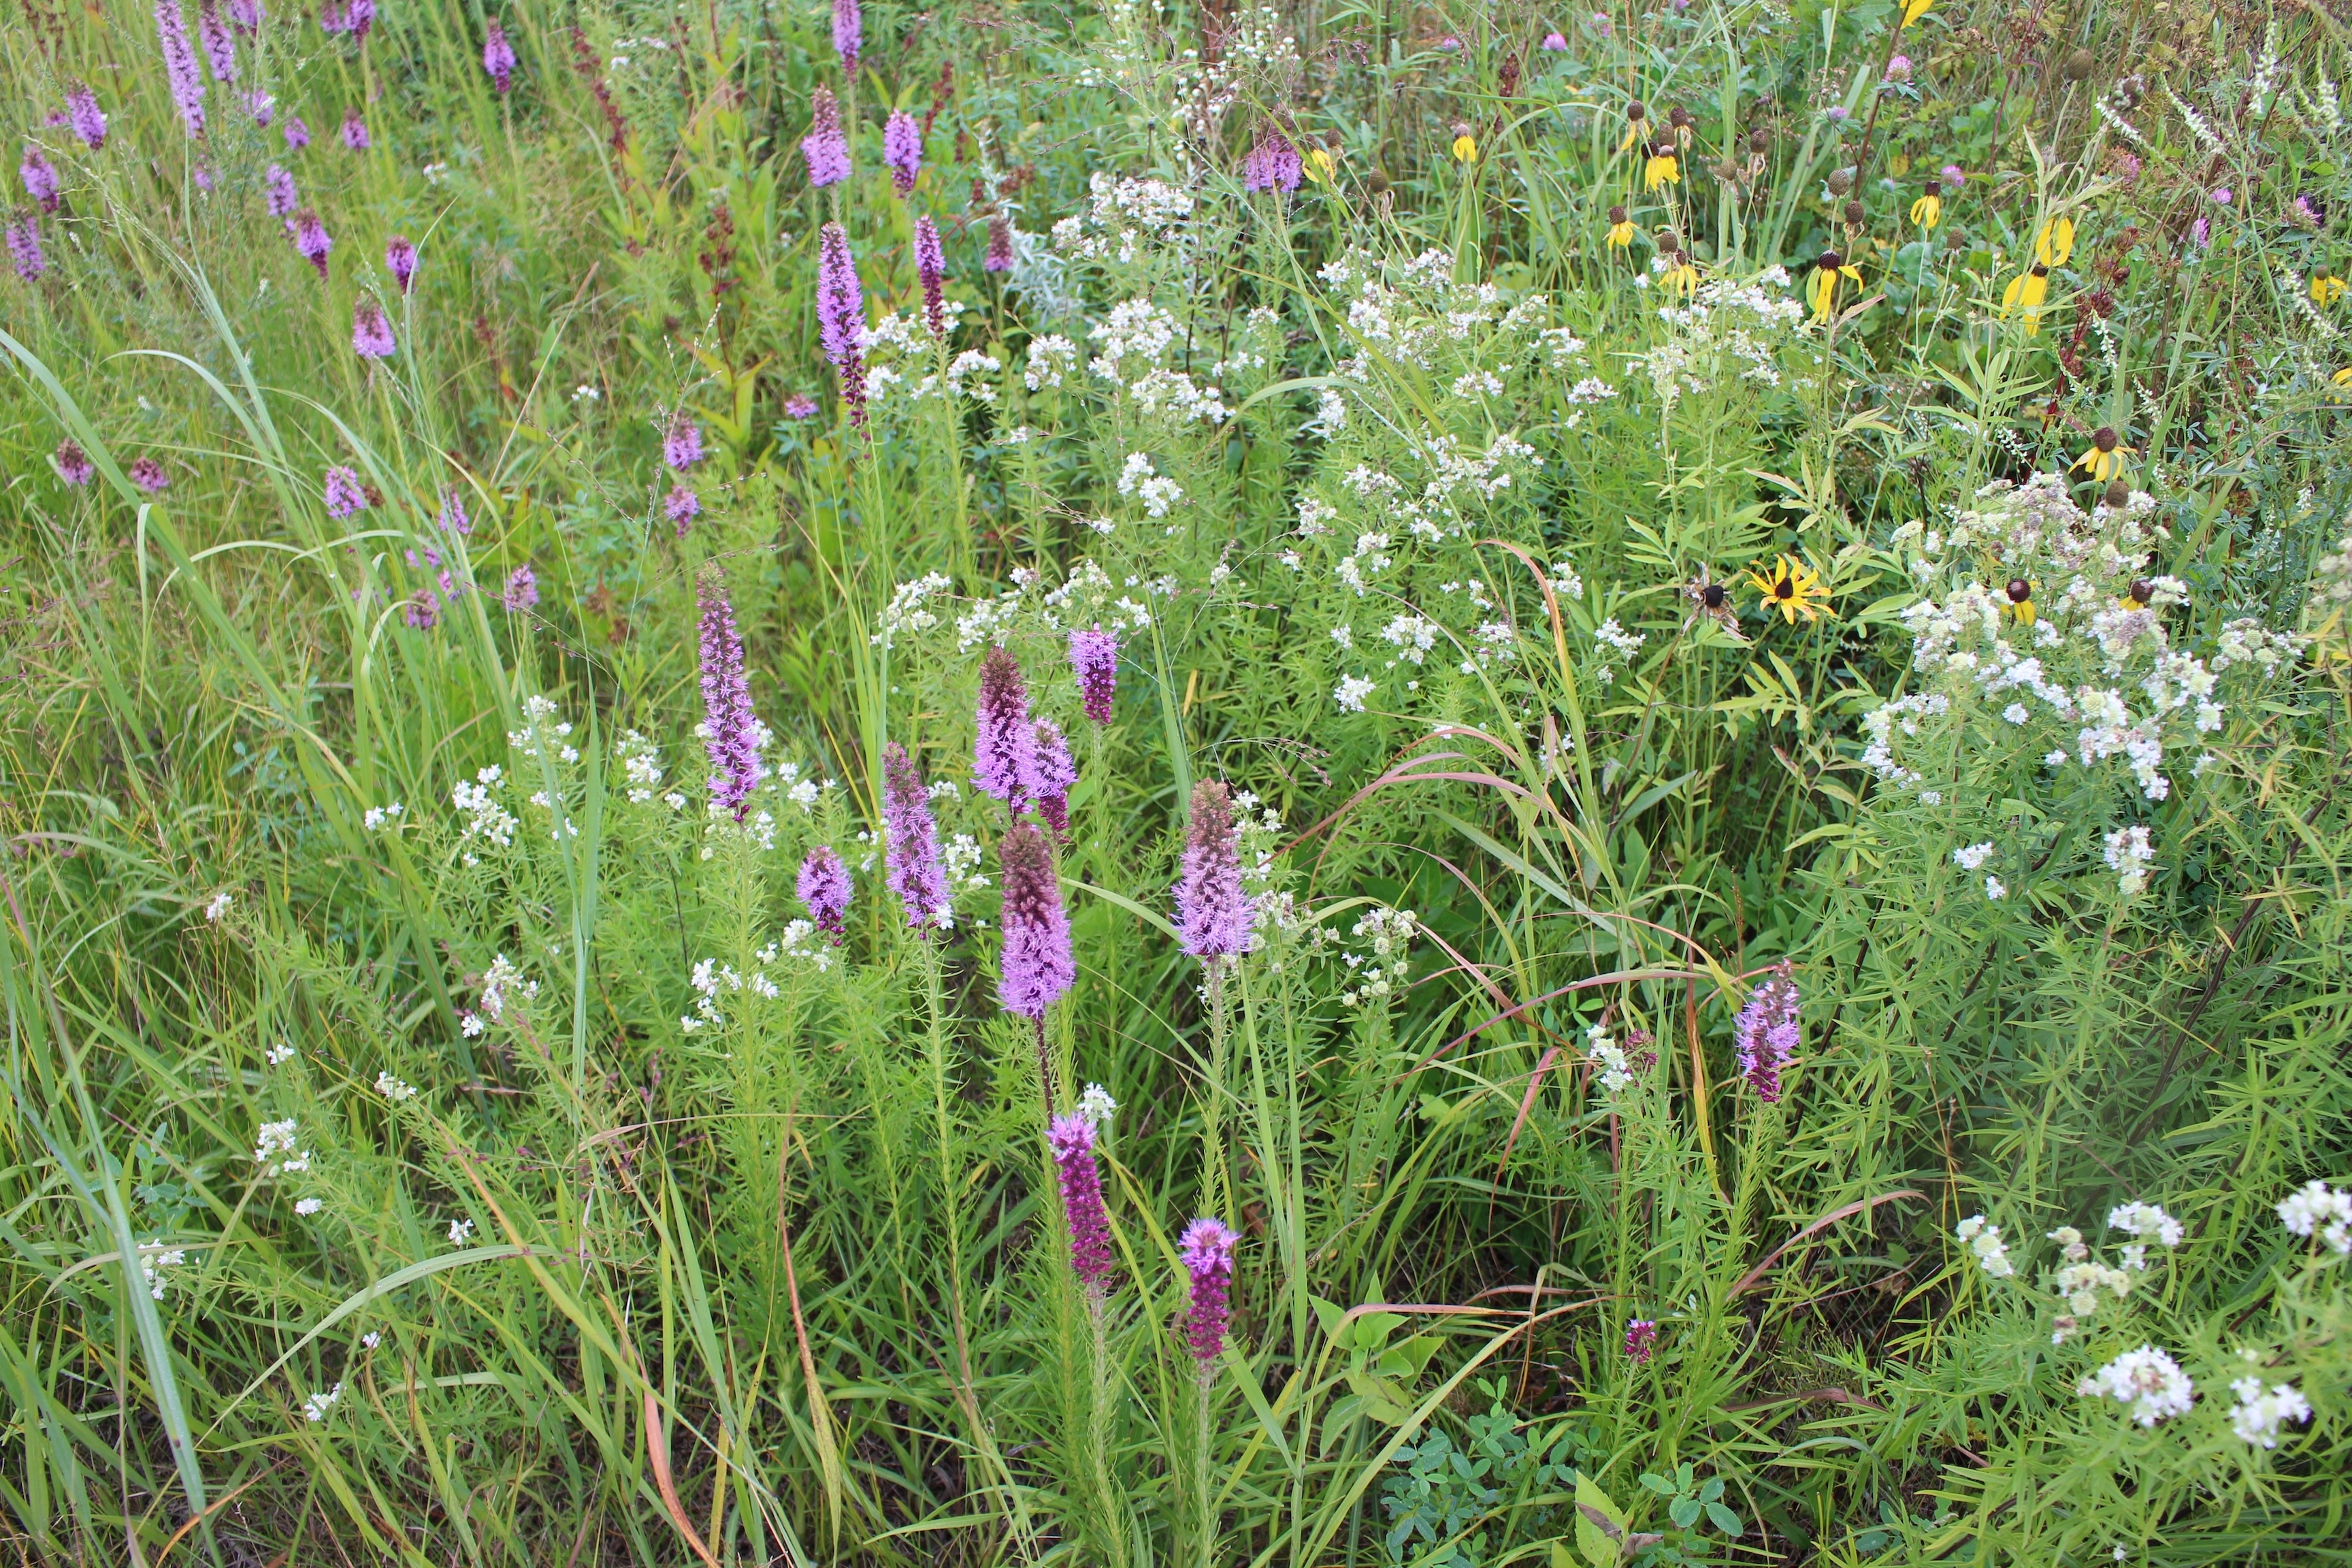 Close up photo of light purple and white wildflowers